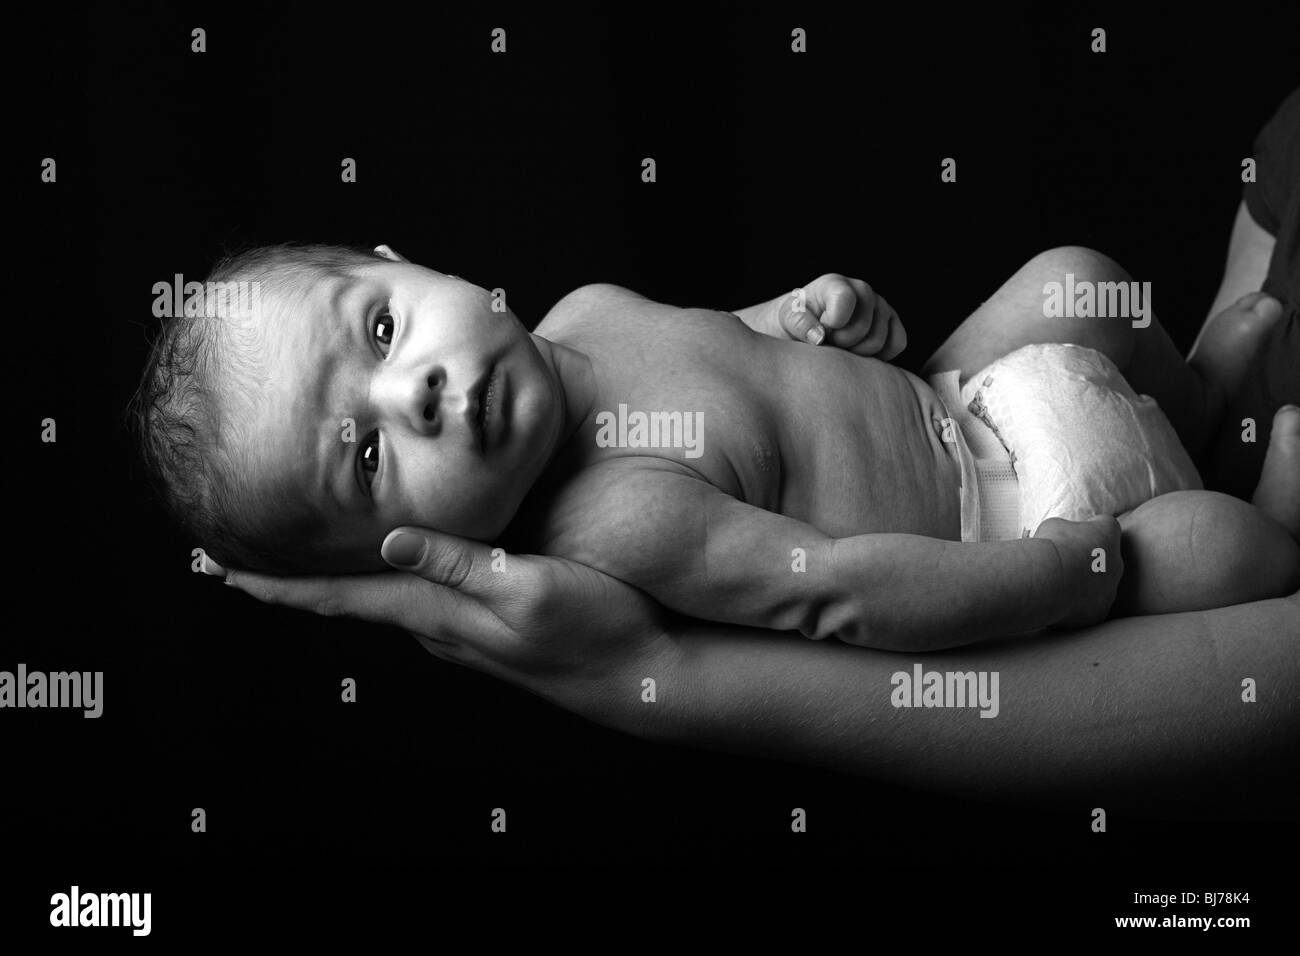 a newly born child gazes at the camera in a low key dramatic setting Stock Photo